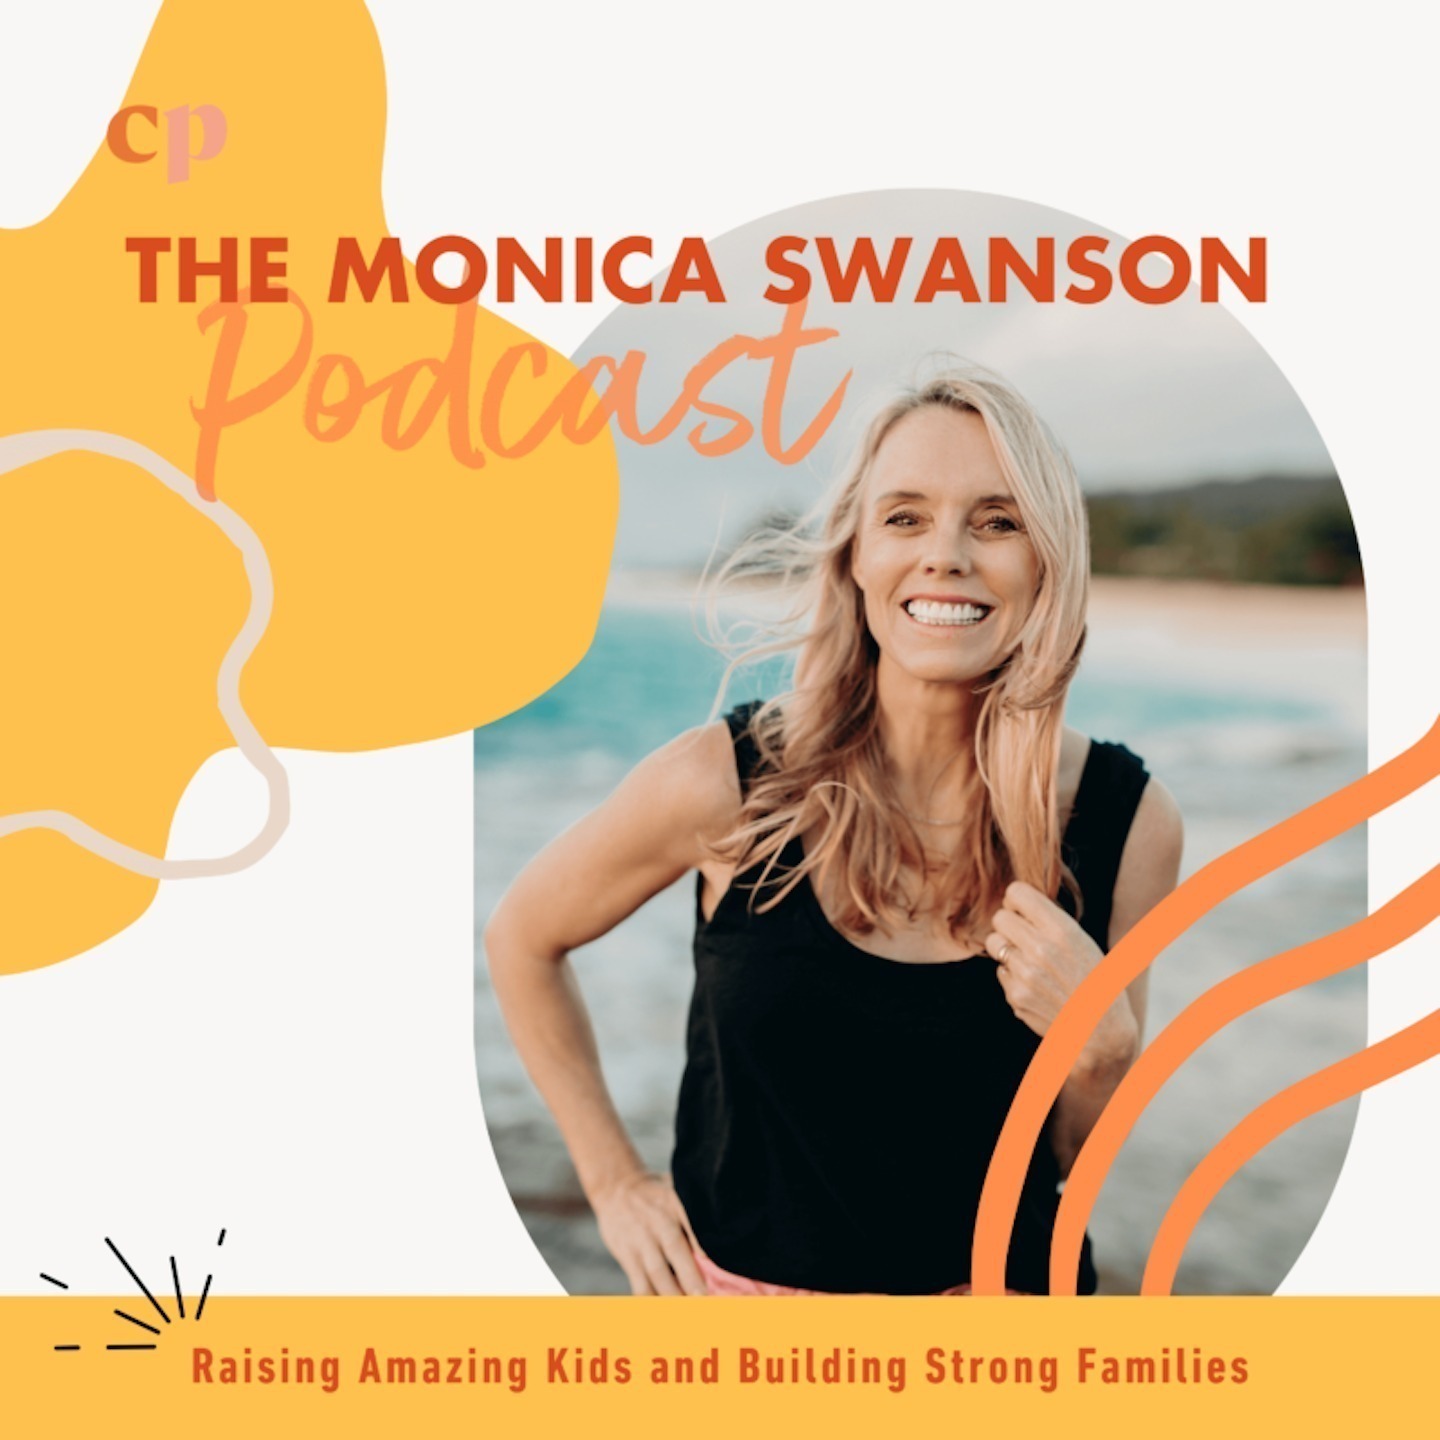 Finding Hope and Healing after Marriage Ends, with Brandi Wilson